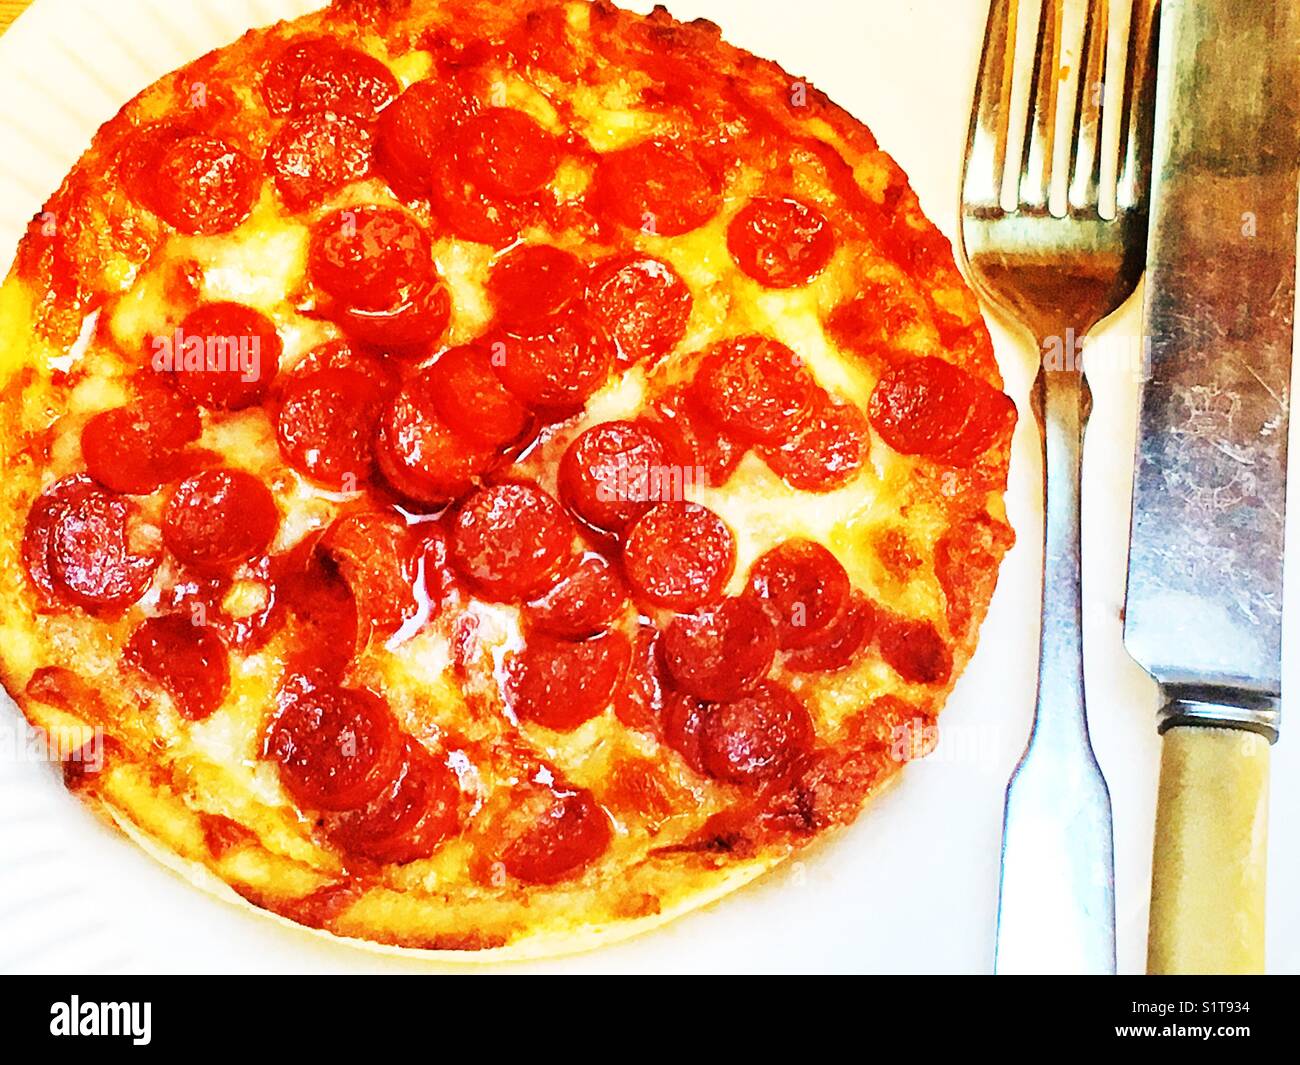 Chicago Town Deep Dish Pepperoni Pizza Stock Photo Alamy